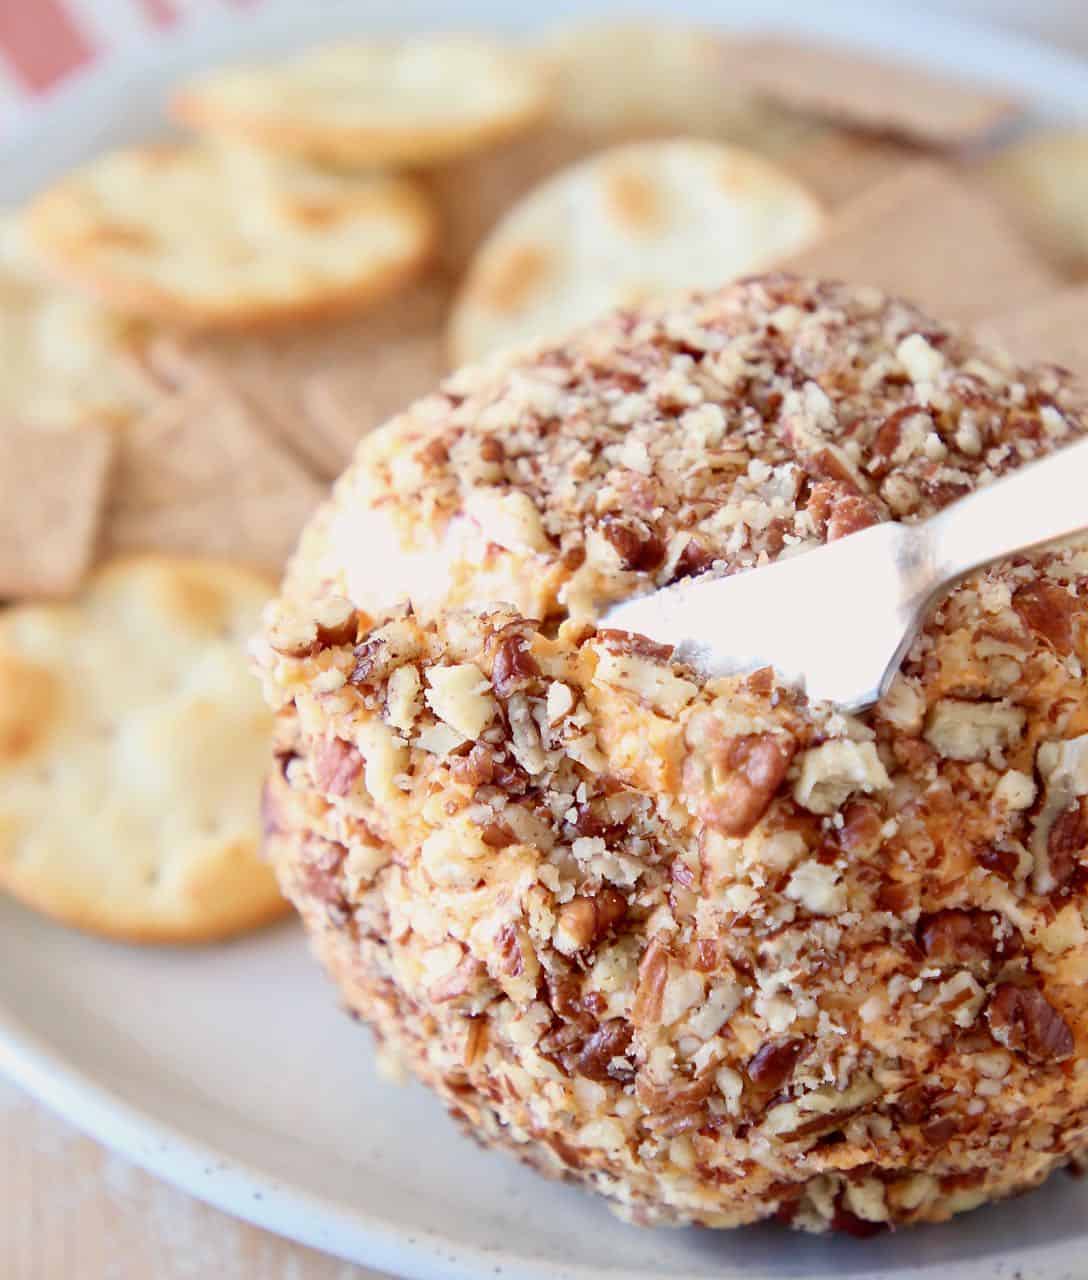 Buffalo cream cheese ball being sliced into with cheese knife